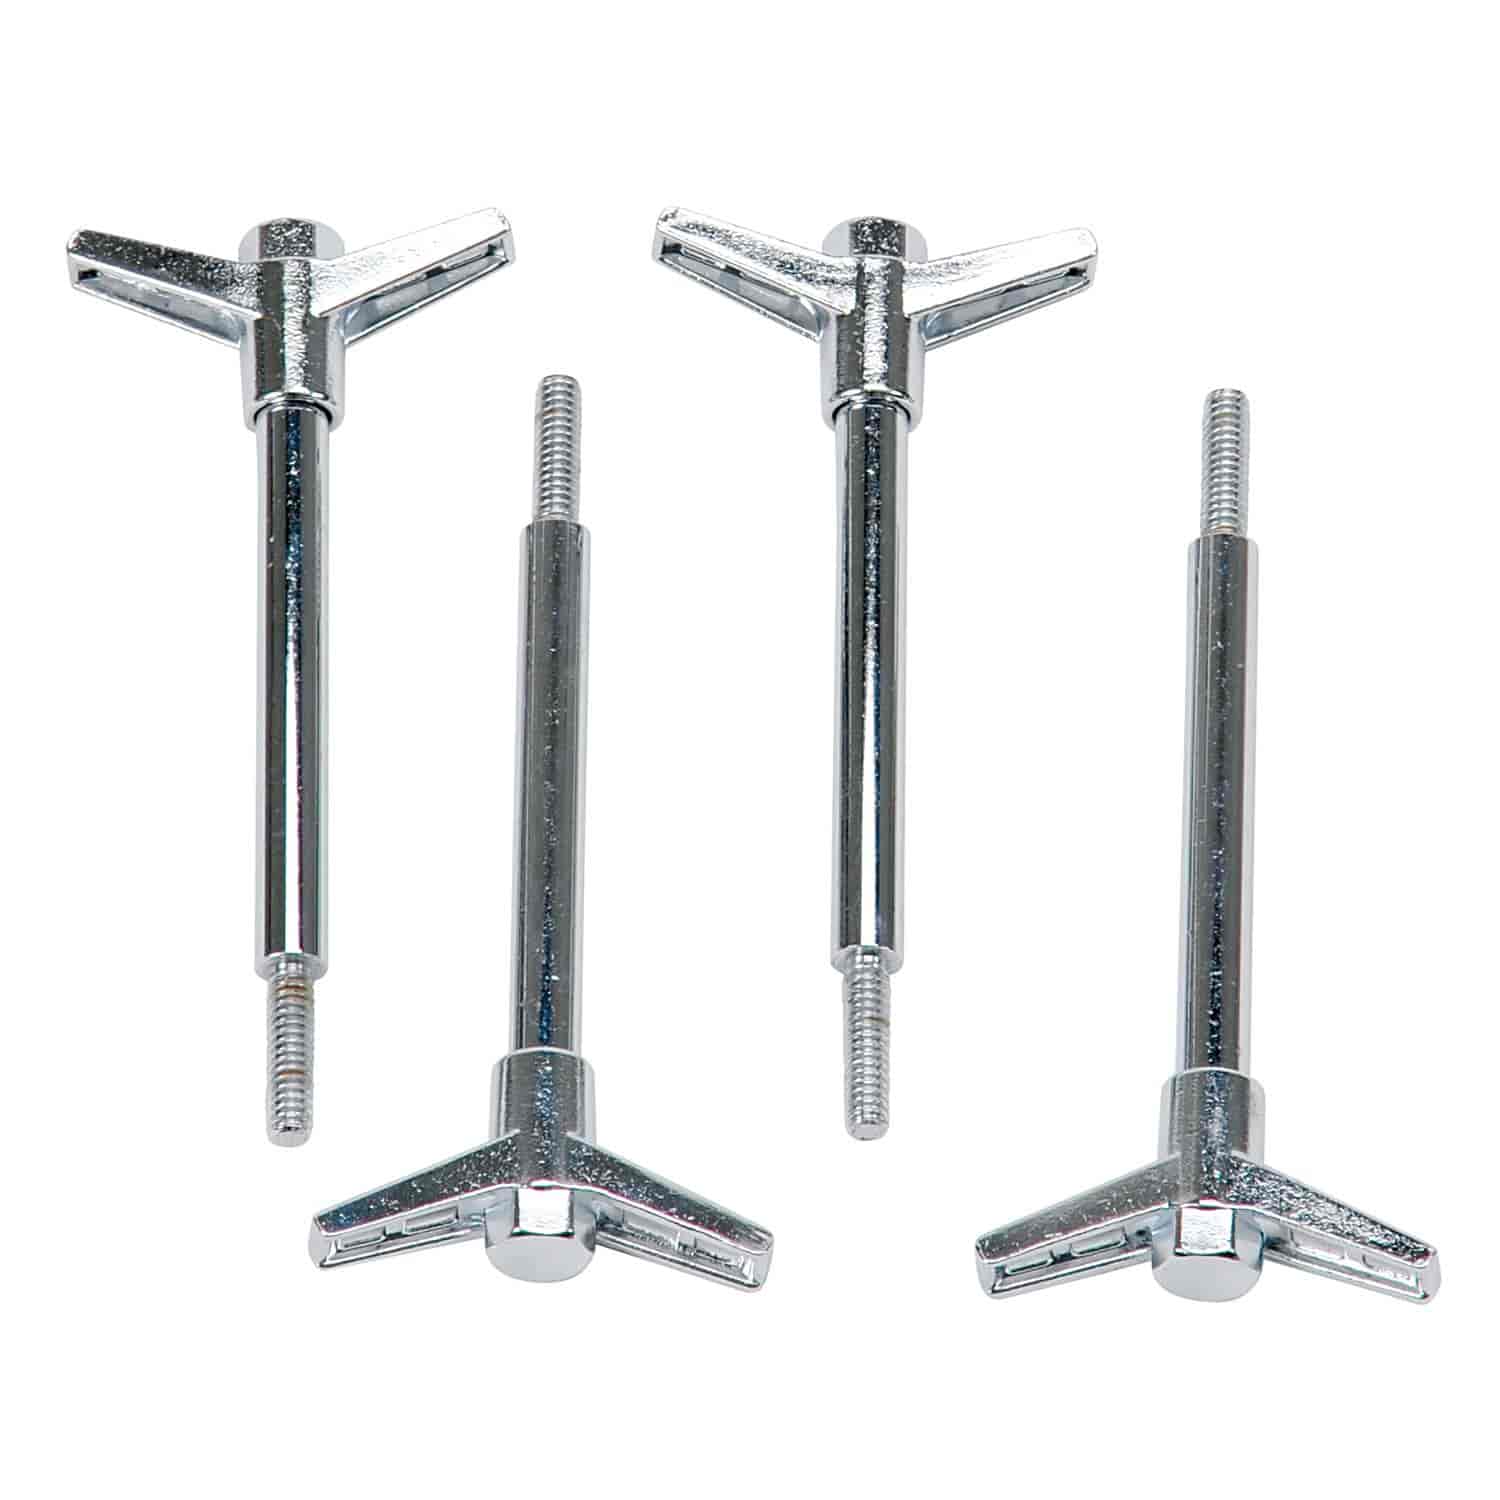 2-Piece Wing Bolts with T-Top, Length of 4-1/4